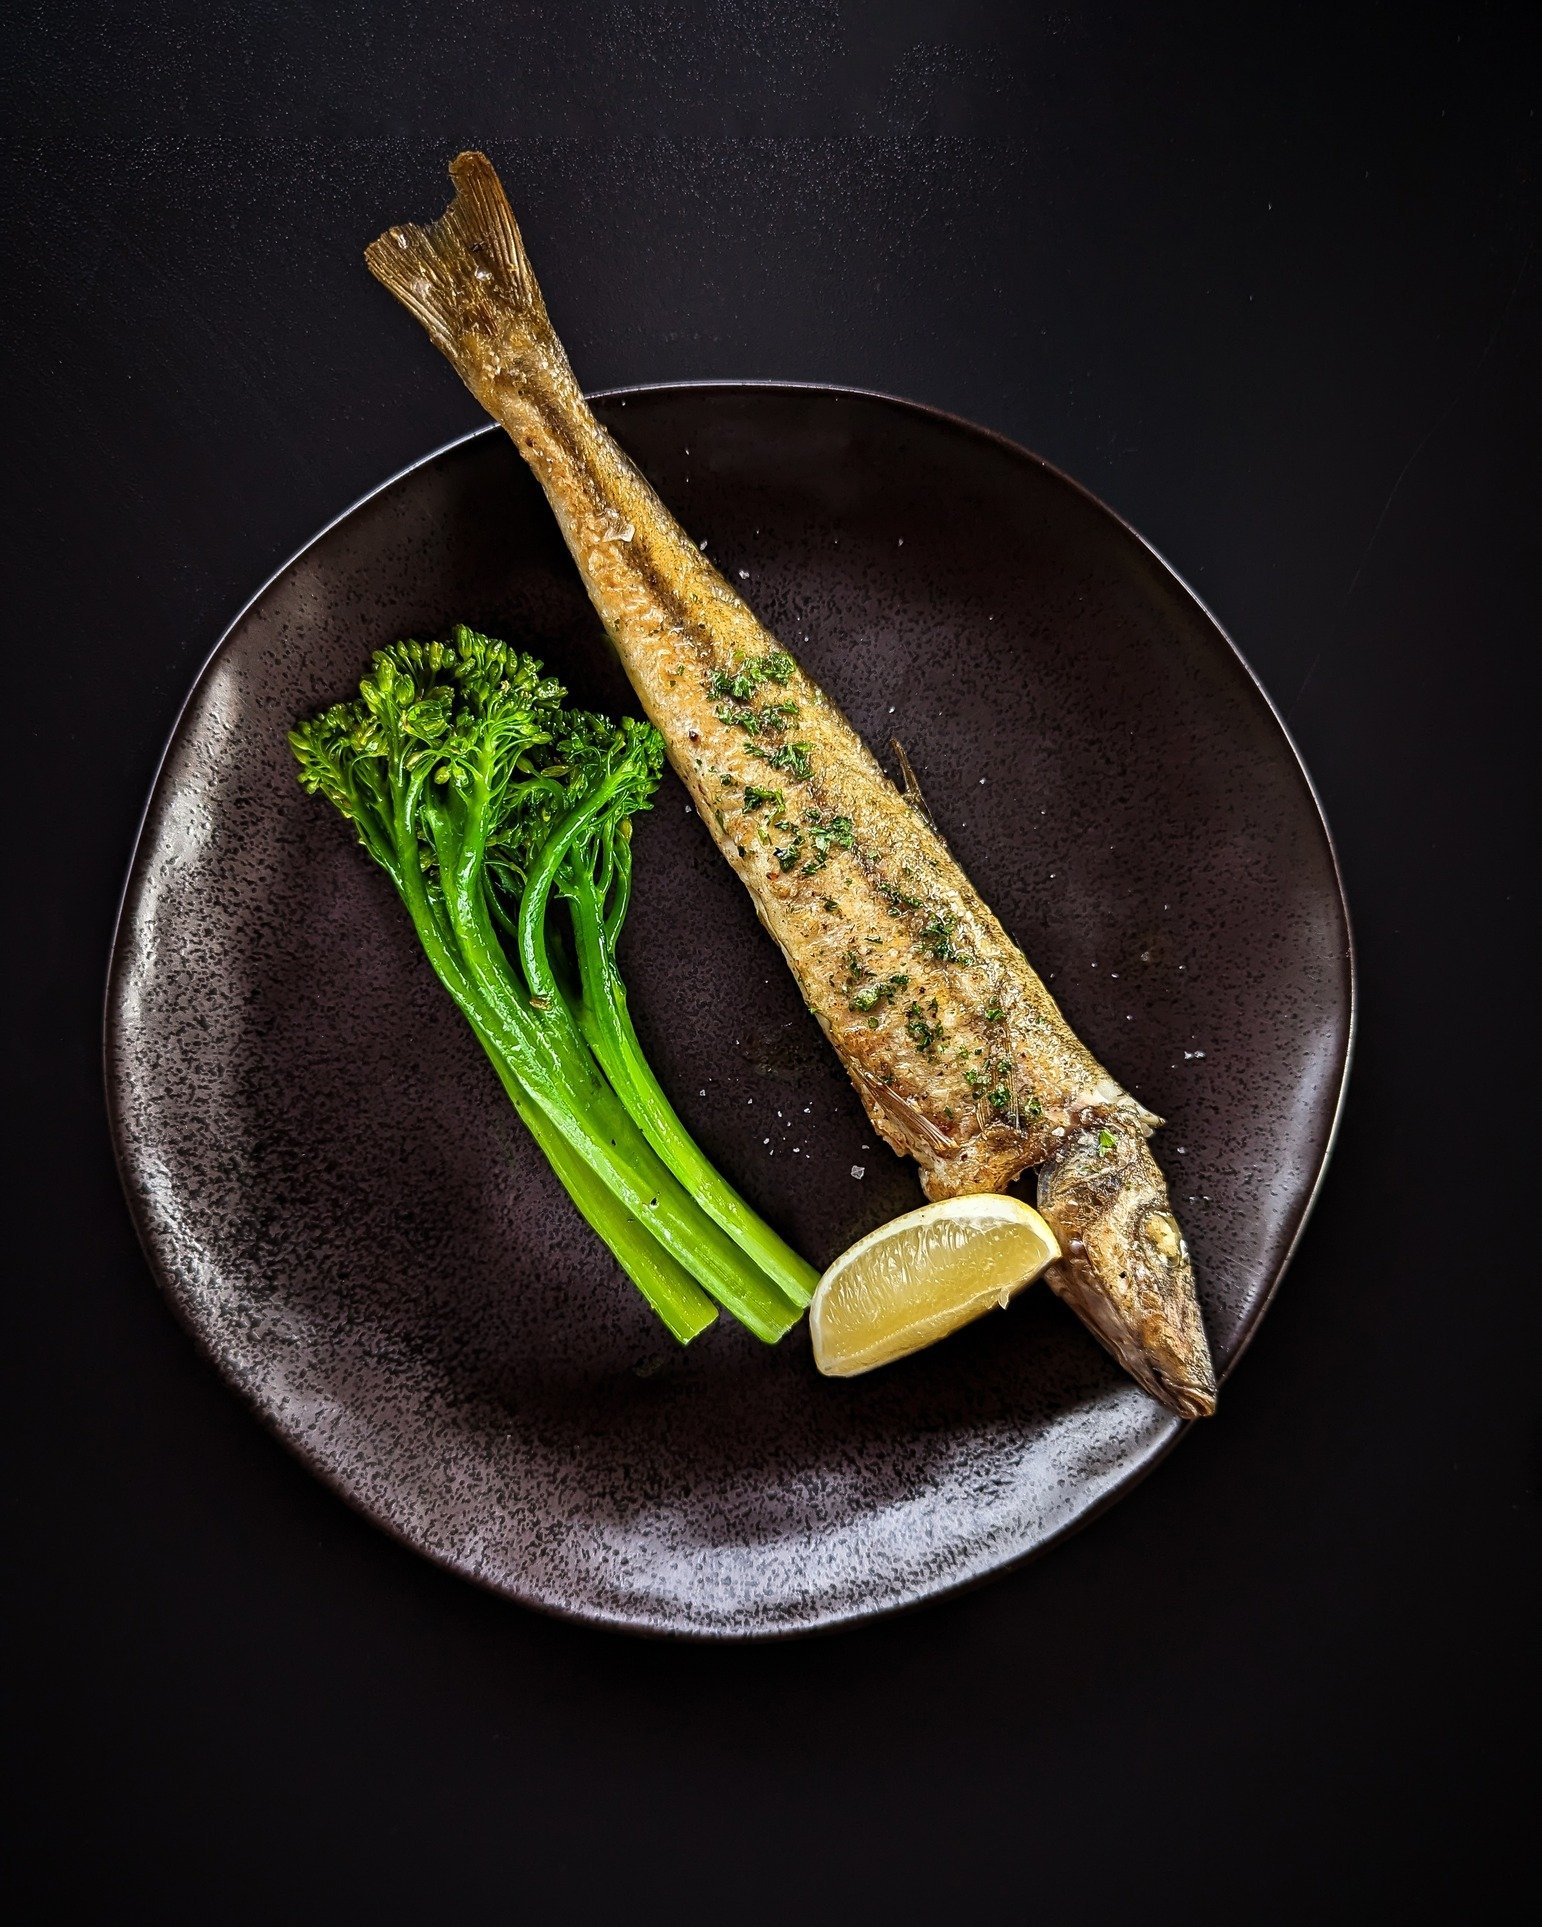 We&rsquo;re loving this King George Whiting special, now available at Pearl.
.
This fish has a lovely delicate flavour with a low oil content.  Our King George Whiting is grilled whole, with beautiful white flesh that just peels straight off the bone